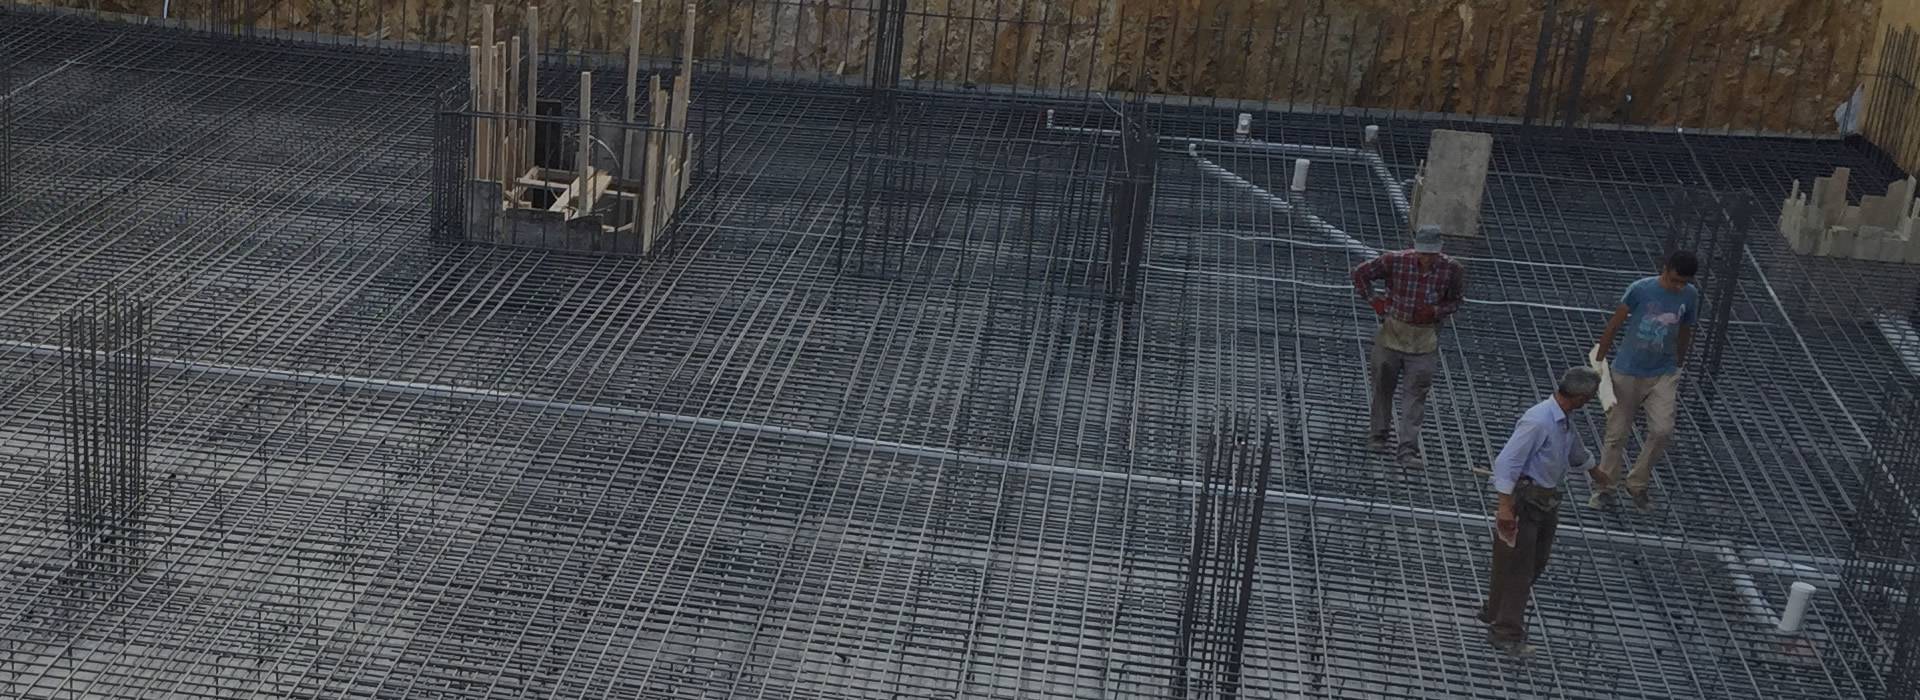 Reinforcing slab mesh used in construction structure, and two workers stand on it.